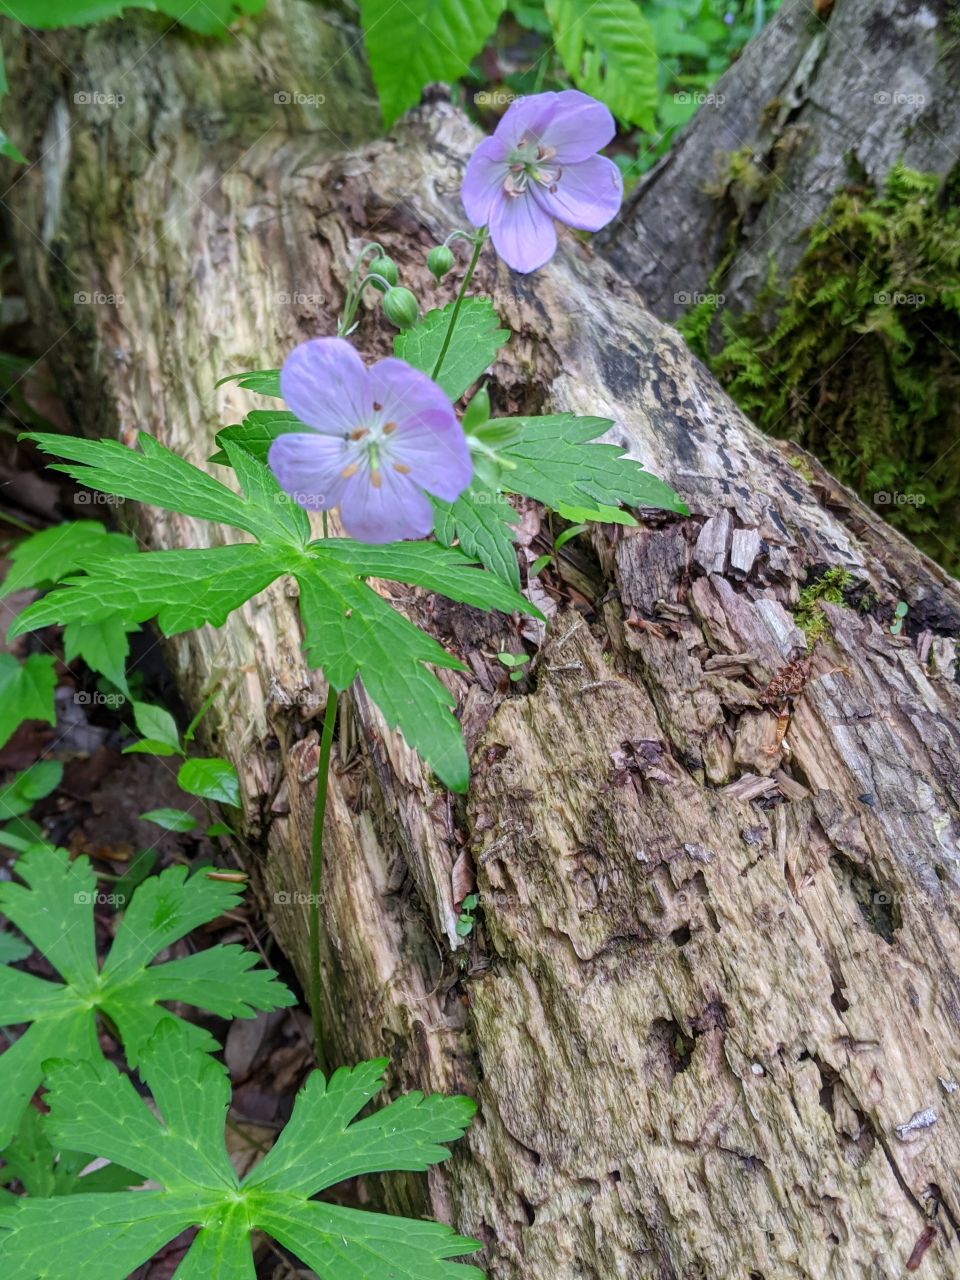 purple flower growing by a log on the ground